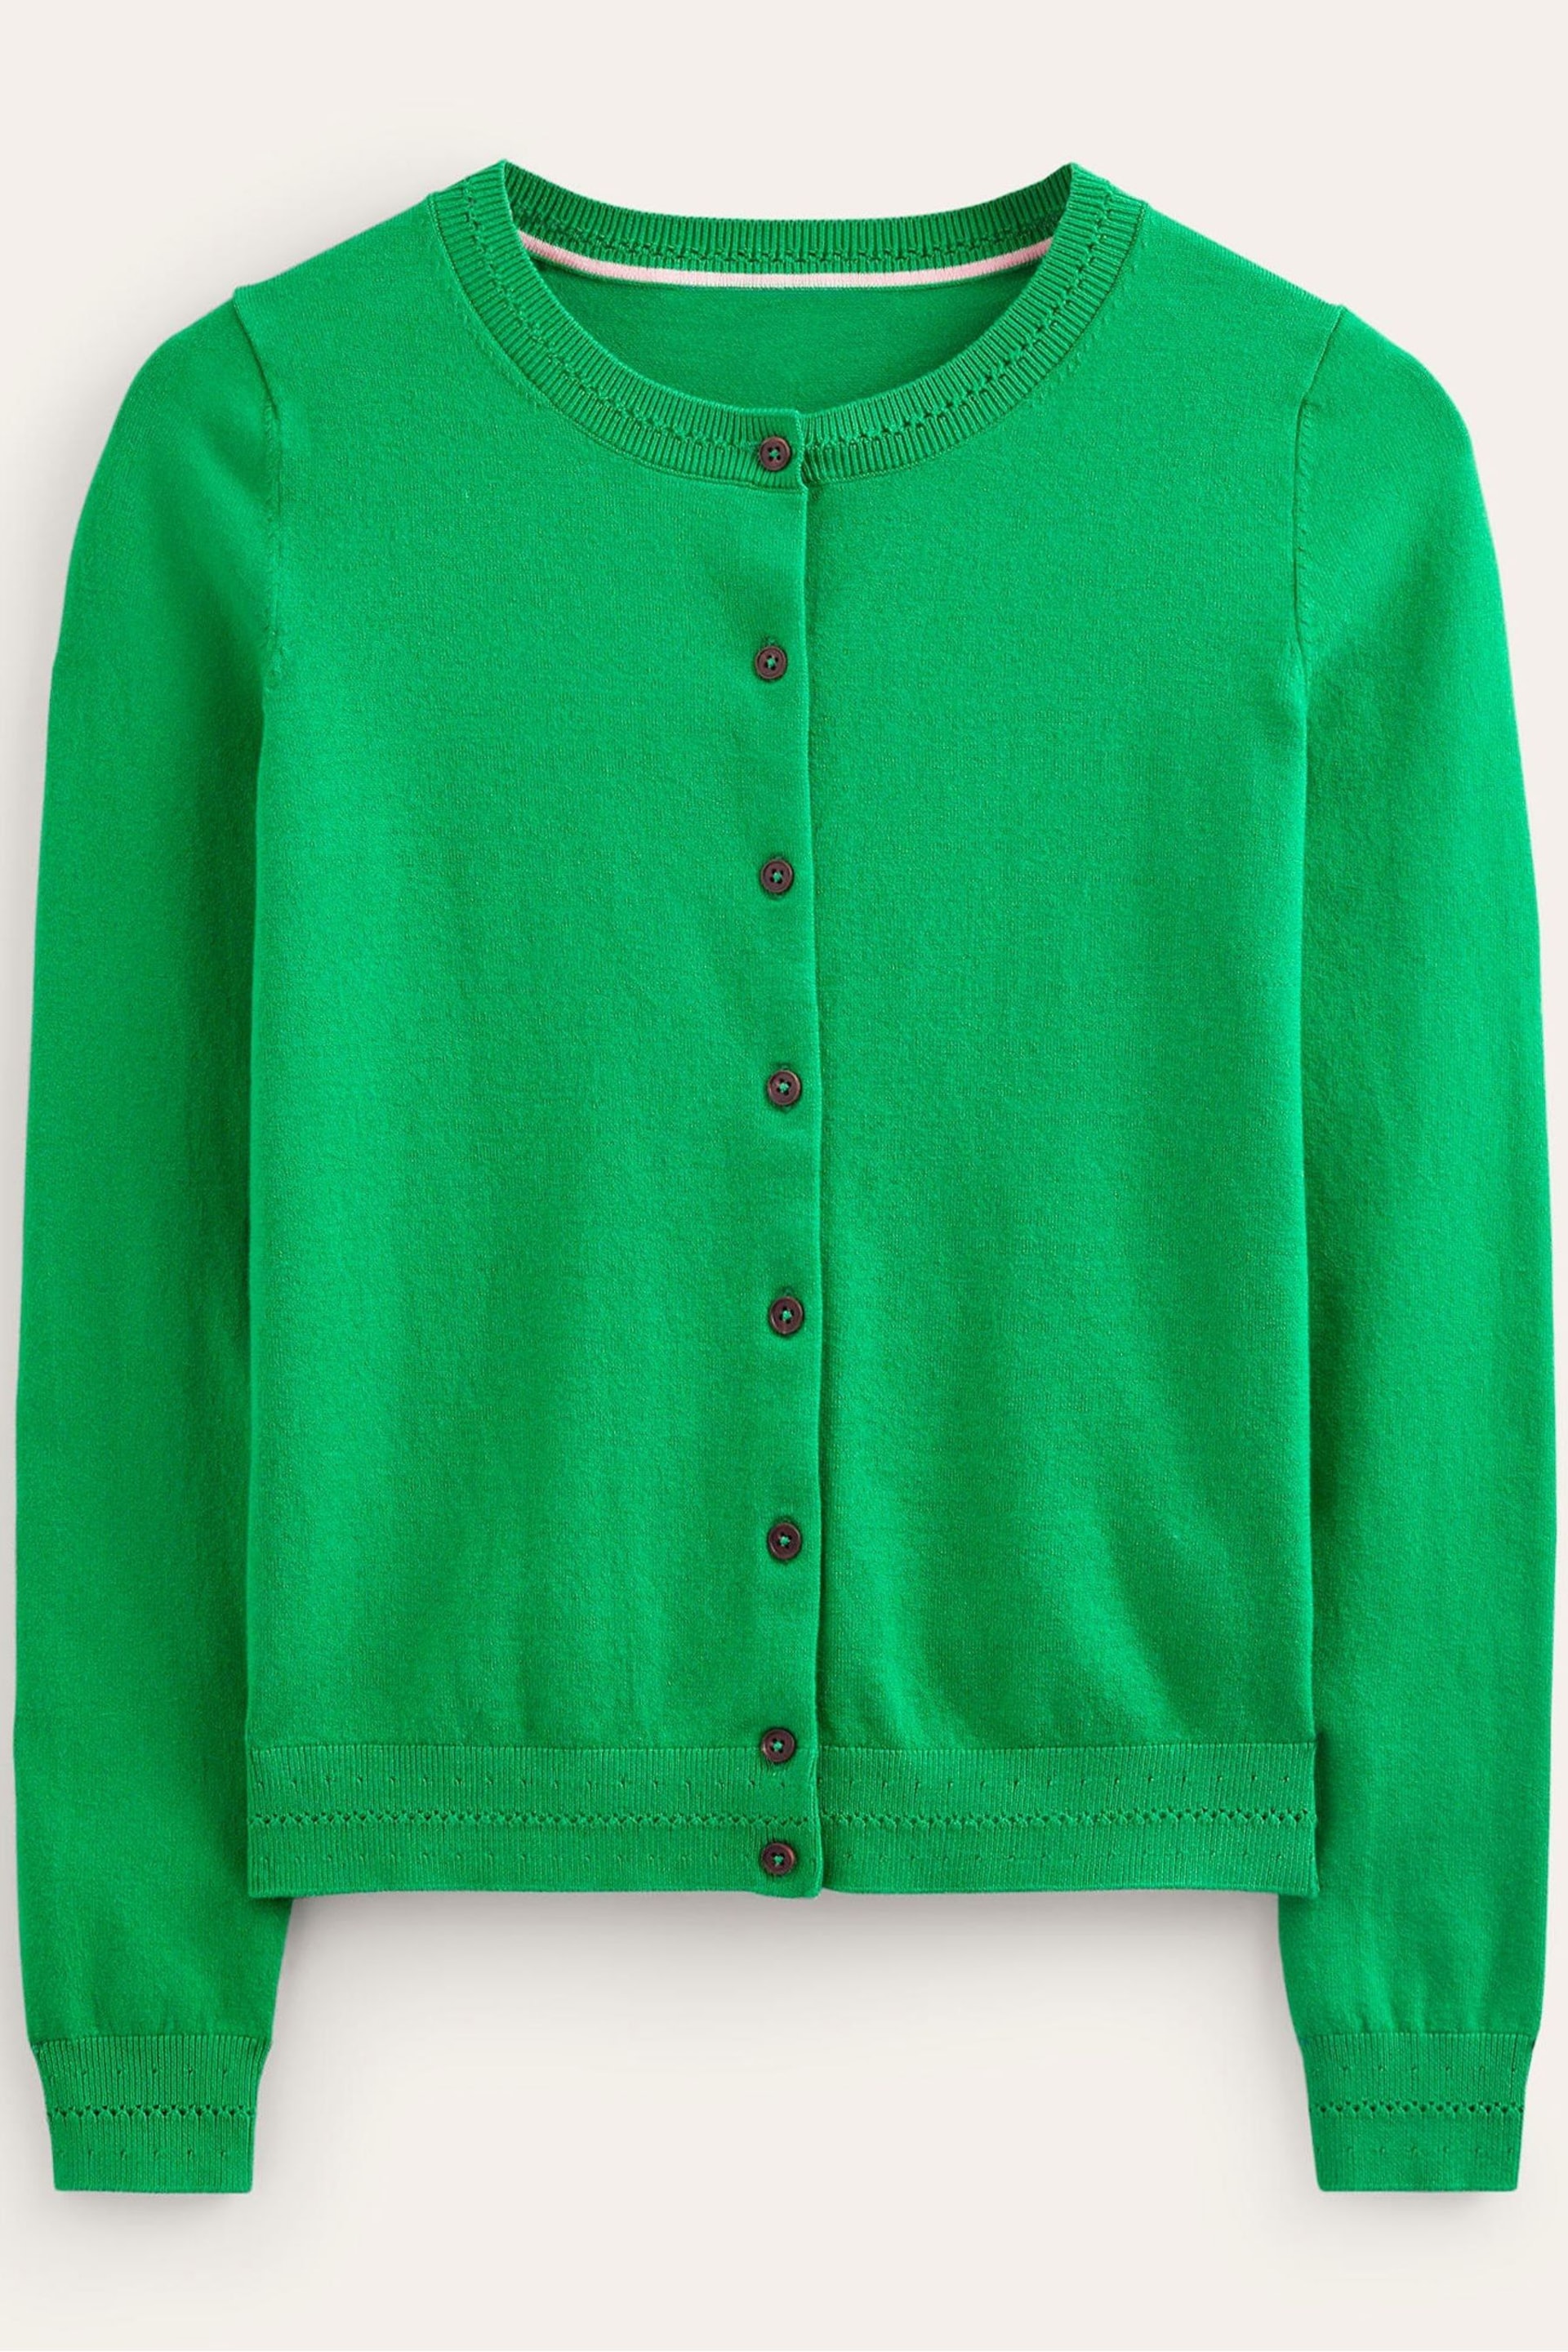 Boden Green Catriona Cotton Cardigan - Image 5 of 6